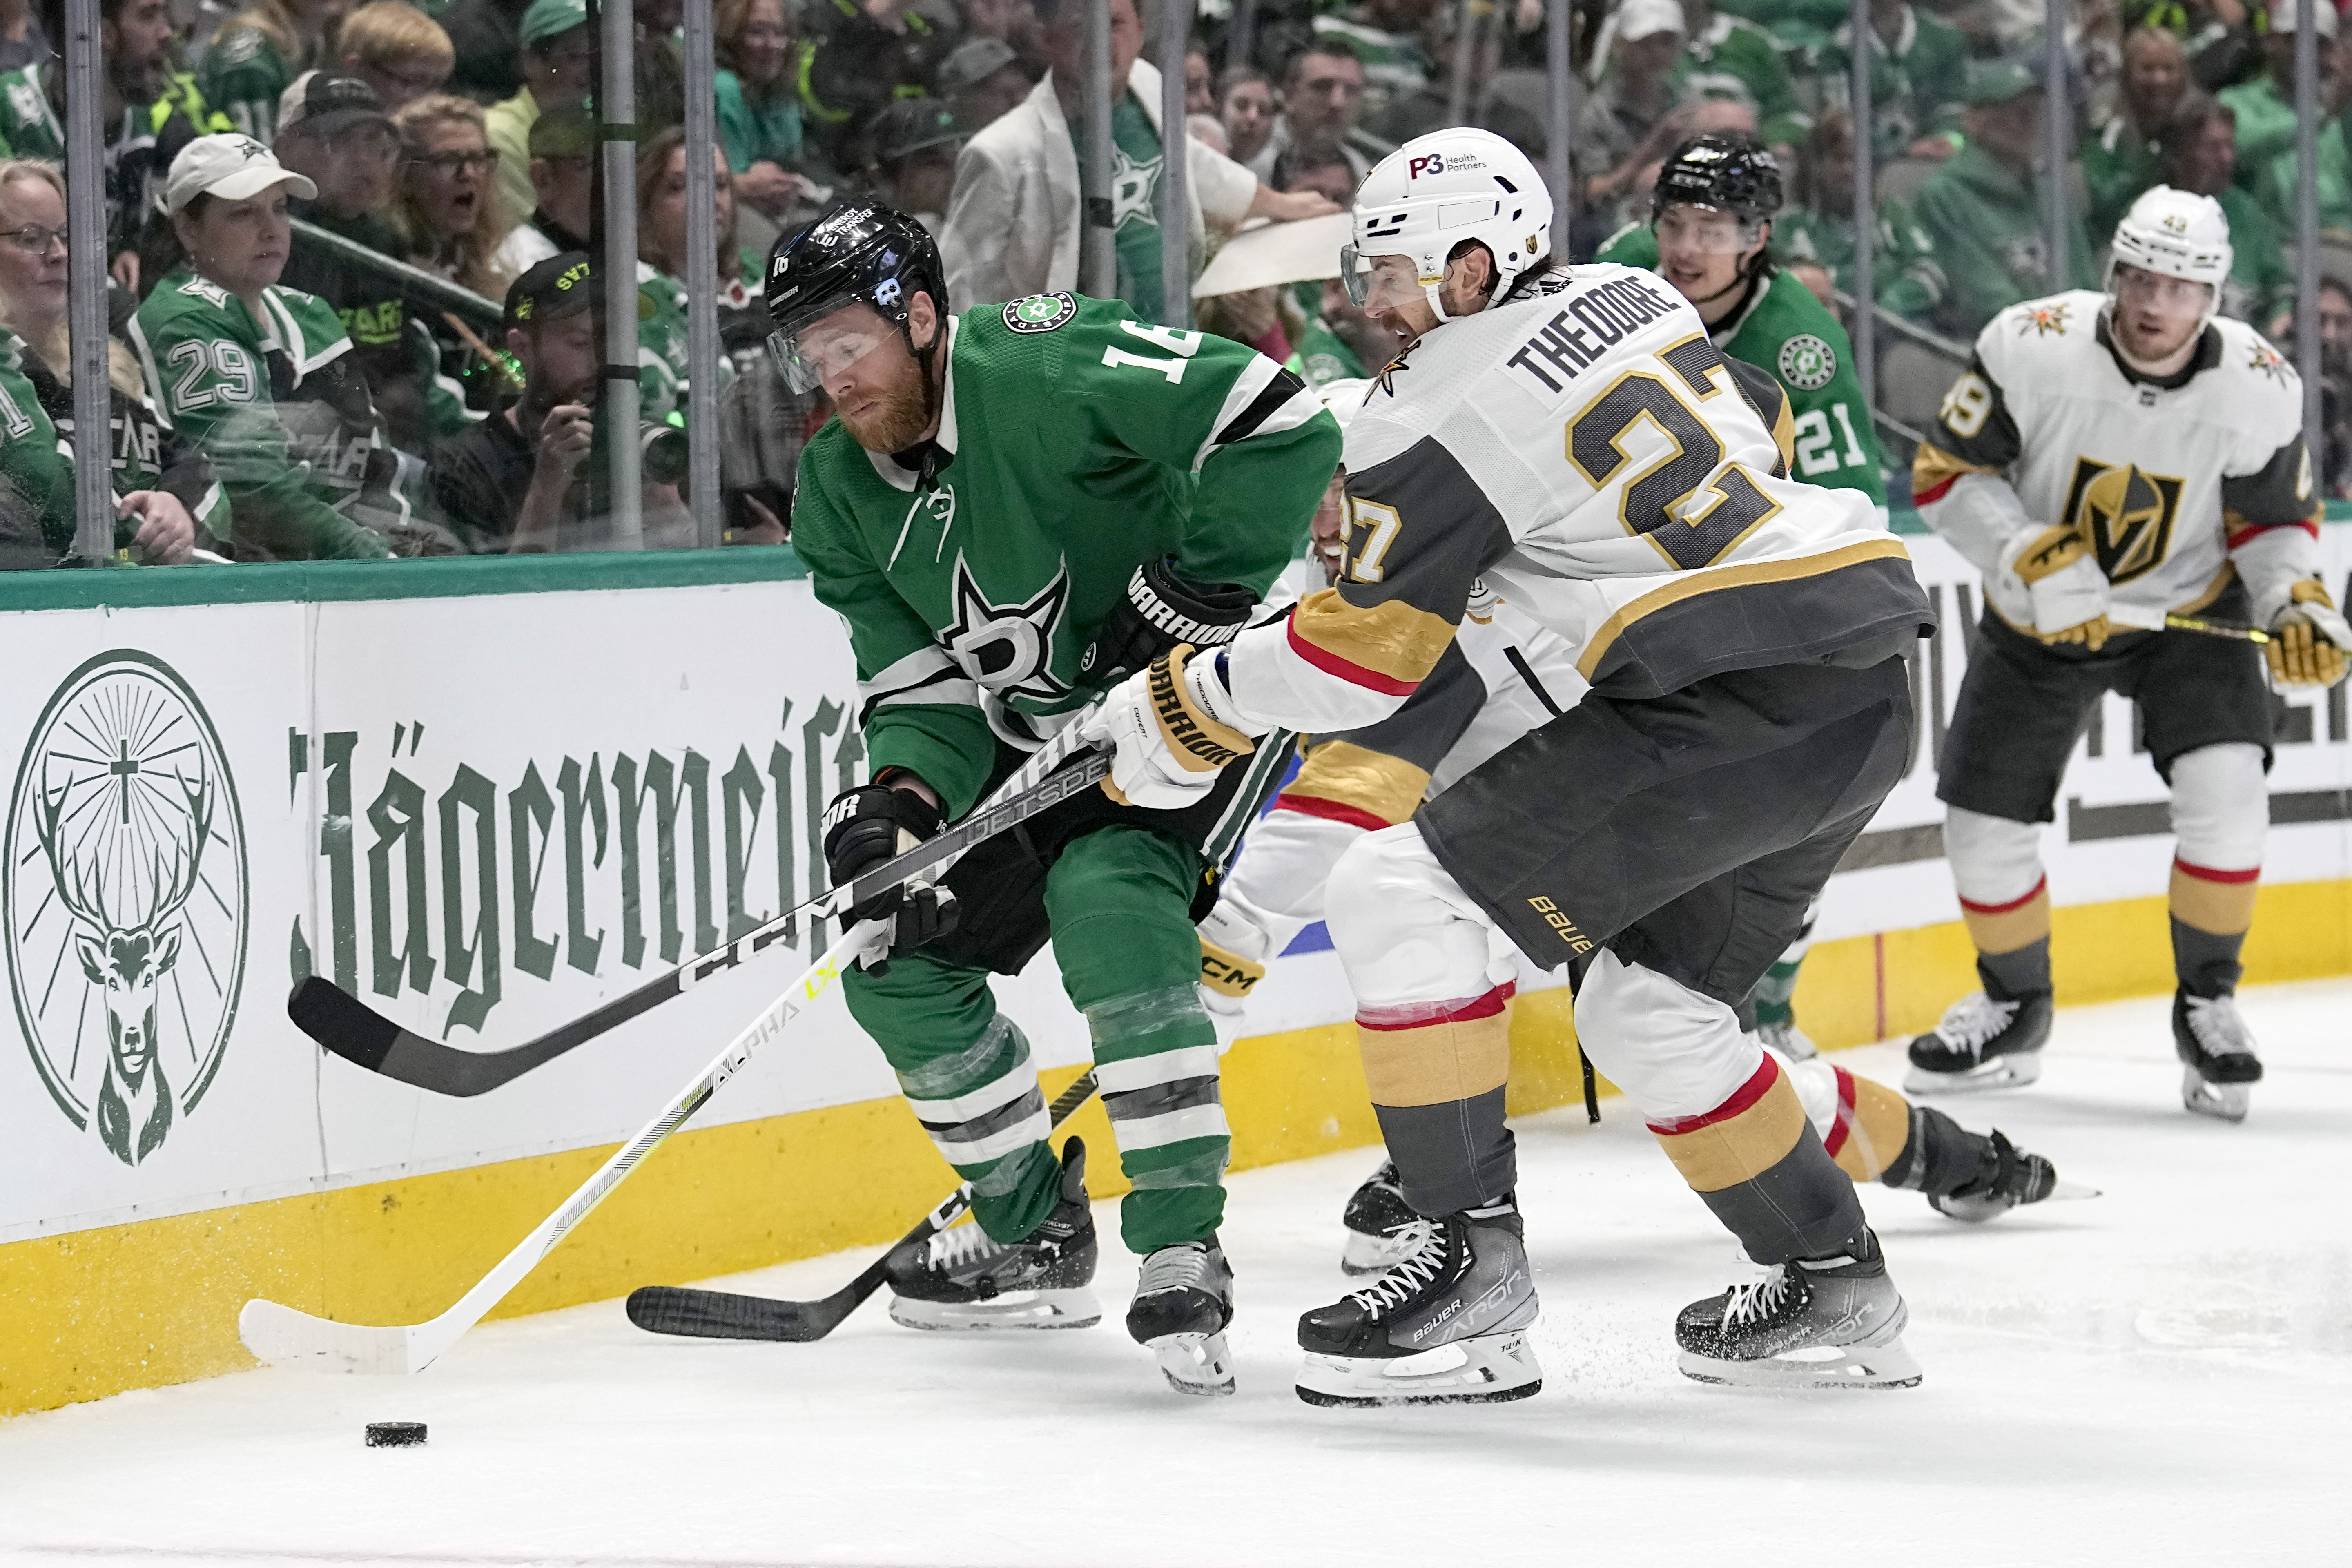 Dallas Stars at Las Vegas Golden Knights Game 5 free live stream NHL Western Conference Final (5/25/23)